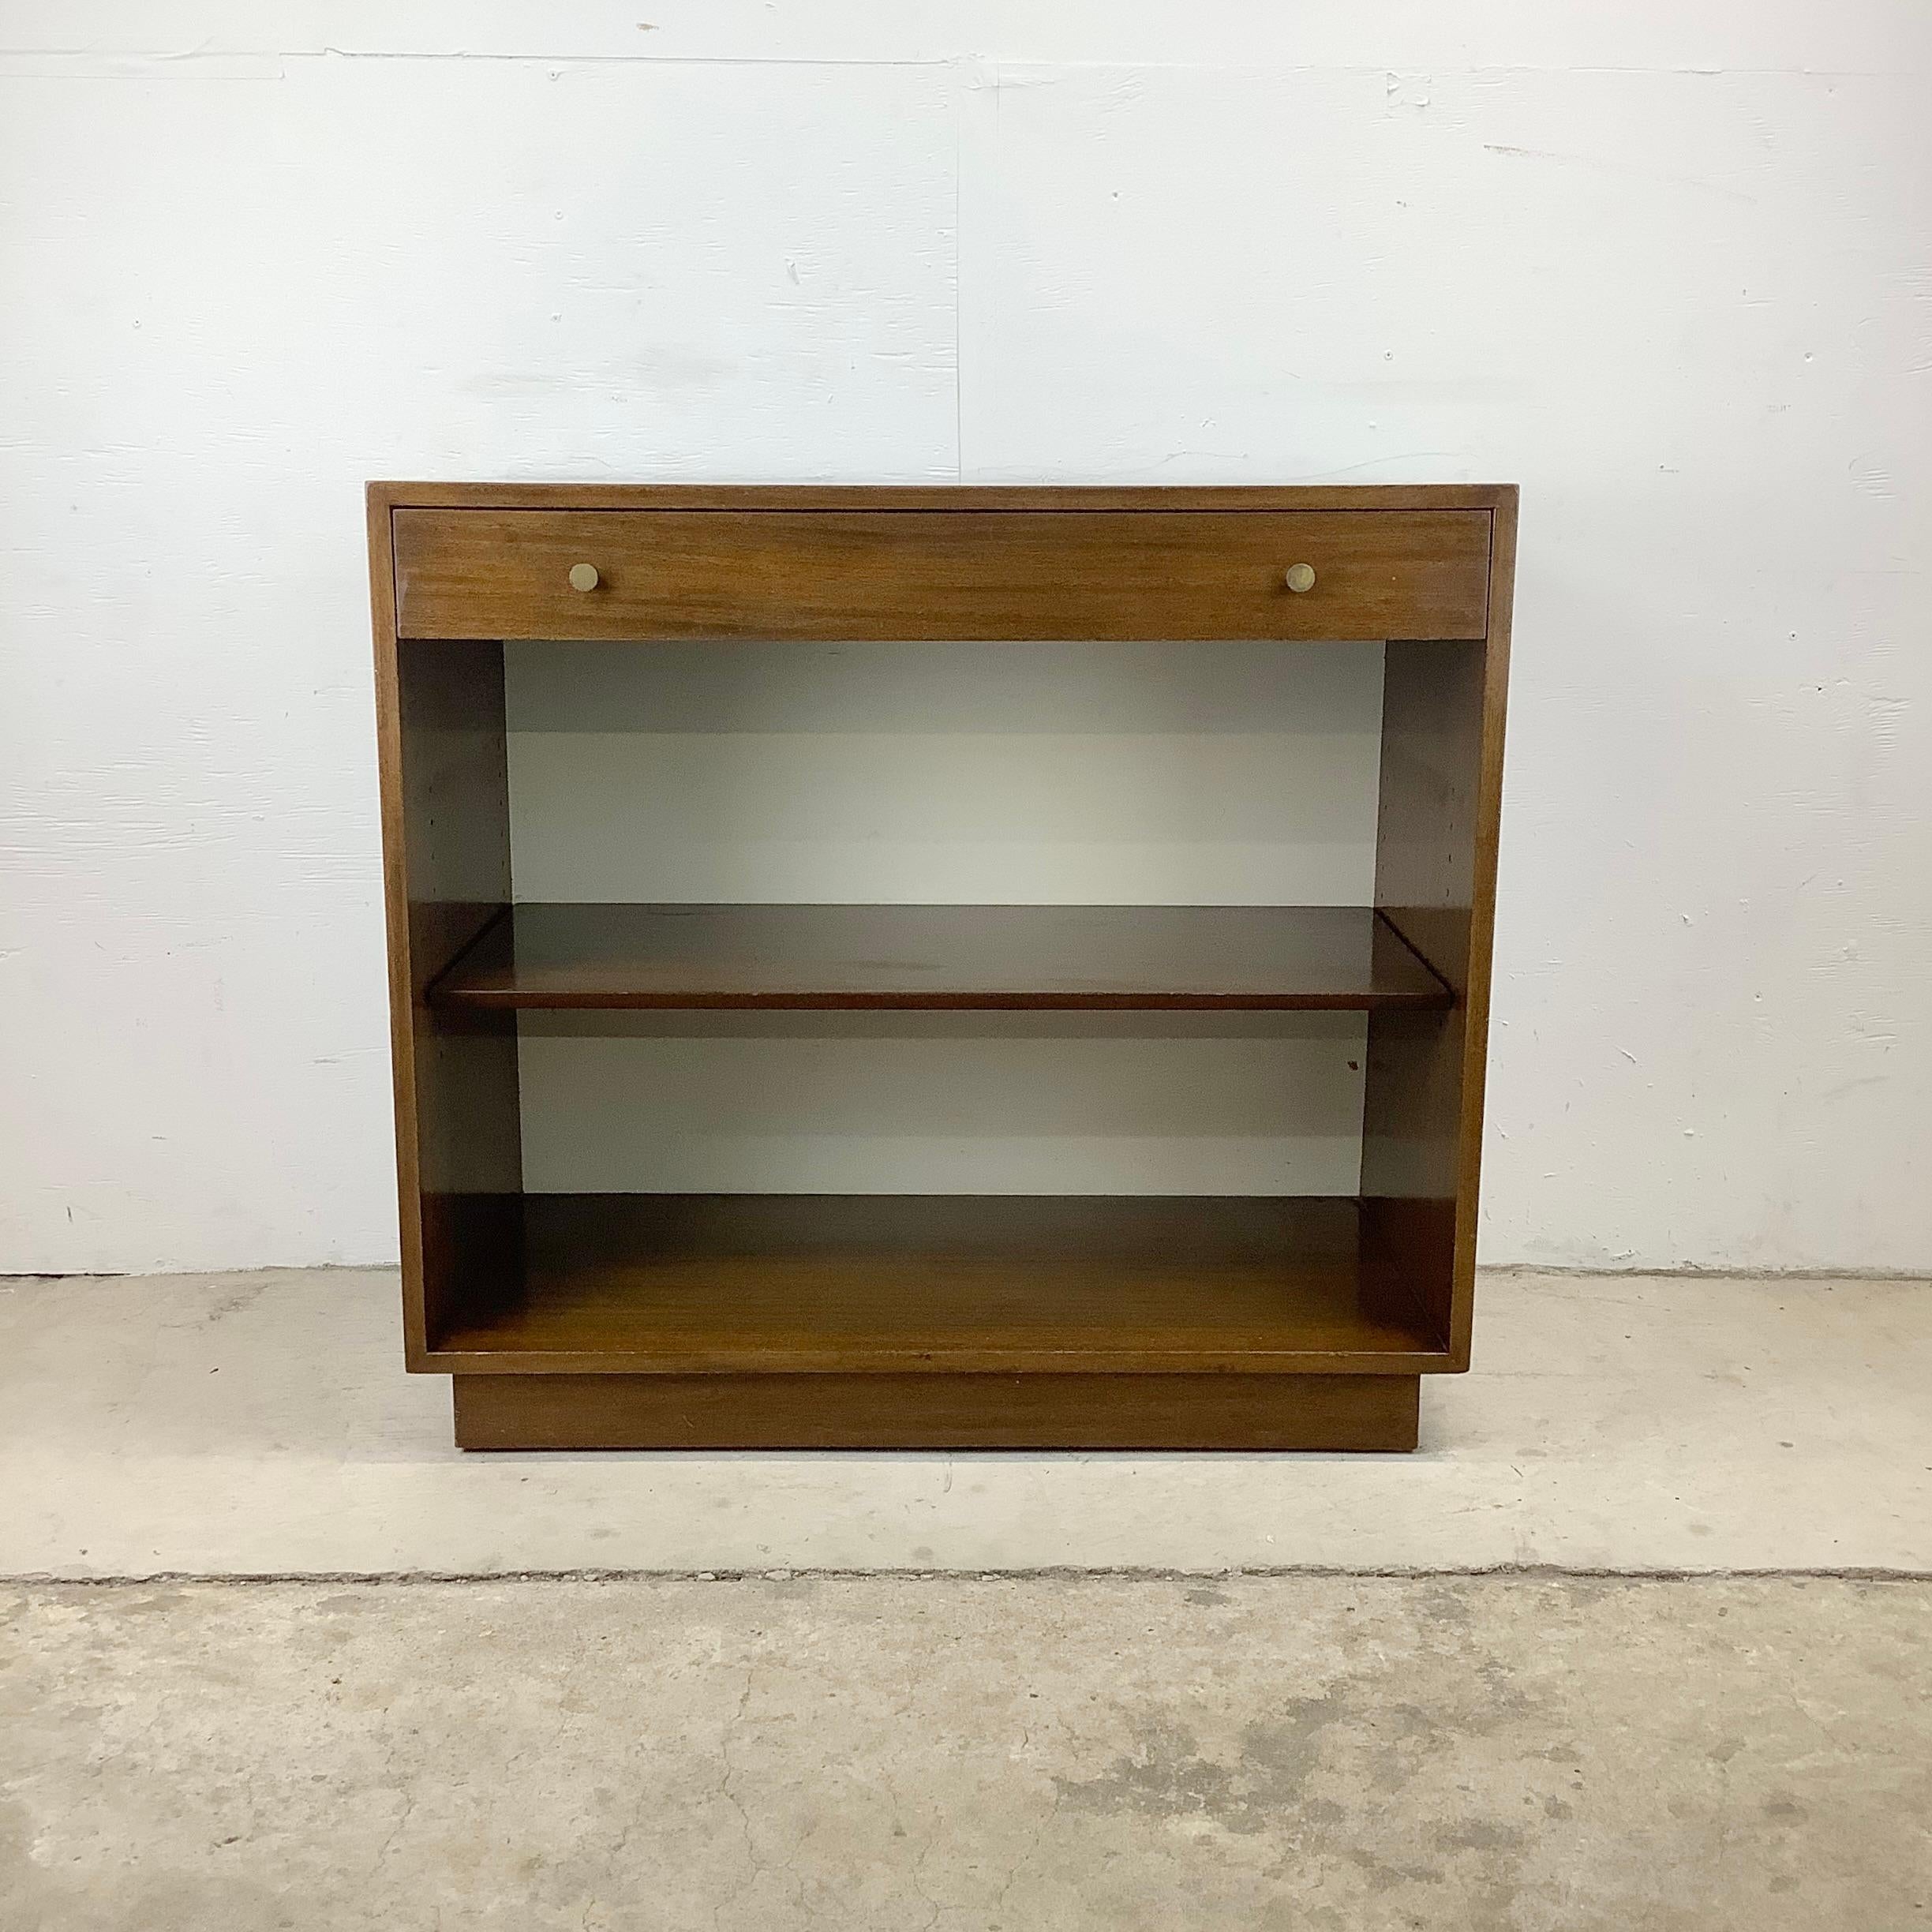 This striking Mid-Century Modern cabinet features a dark wood finish with adjustable shelf lower cubby and wide upper drawer with drop front. Unique storage piece for use in any setting but would be conducive to use as a media credenza or for office